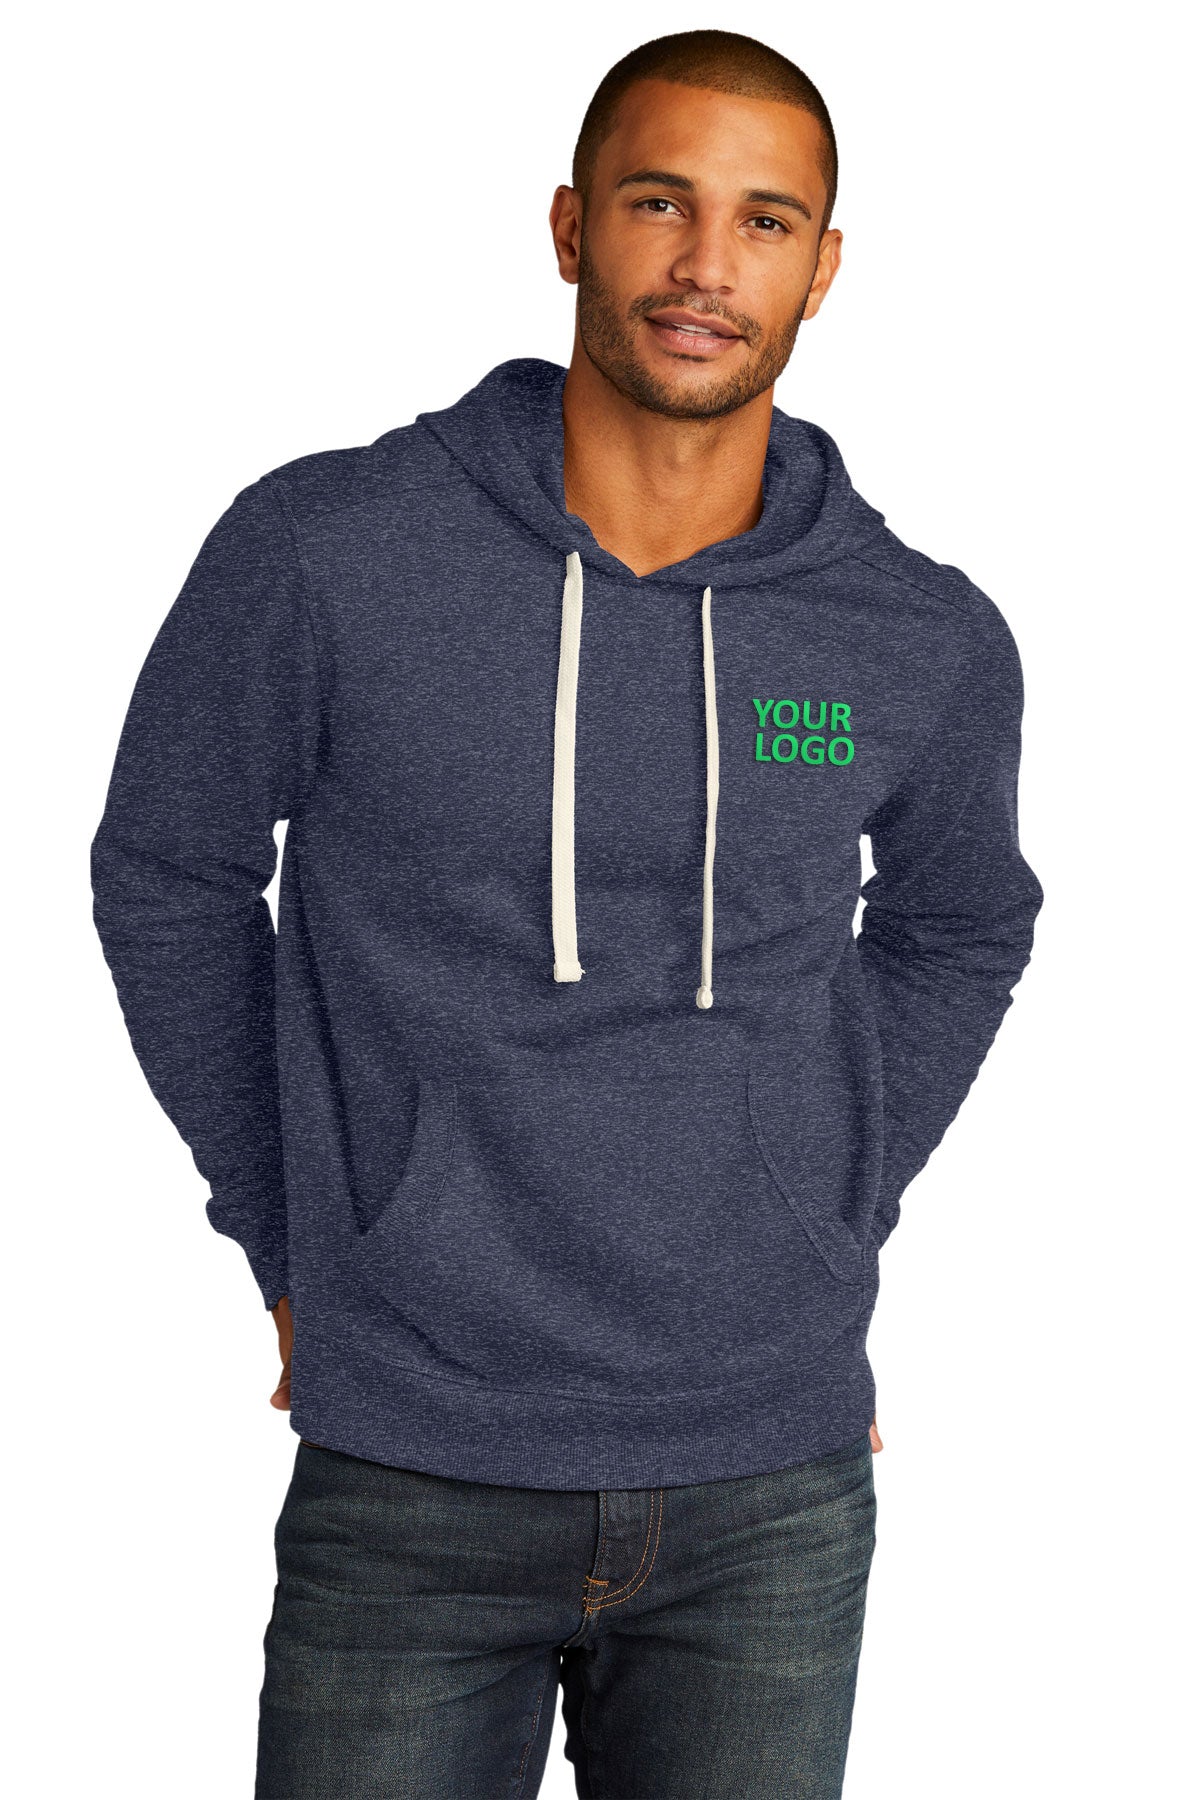 District DT8100 Heathered Navy sweatshirts with company logo